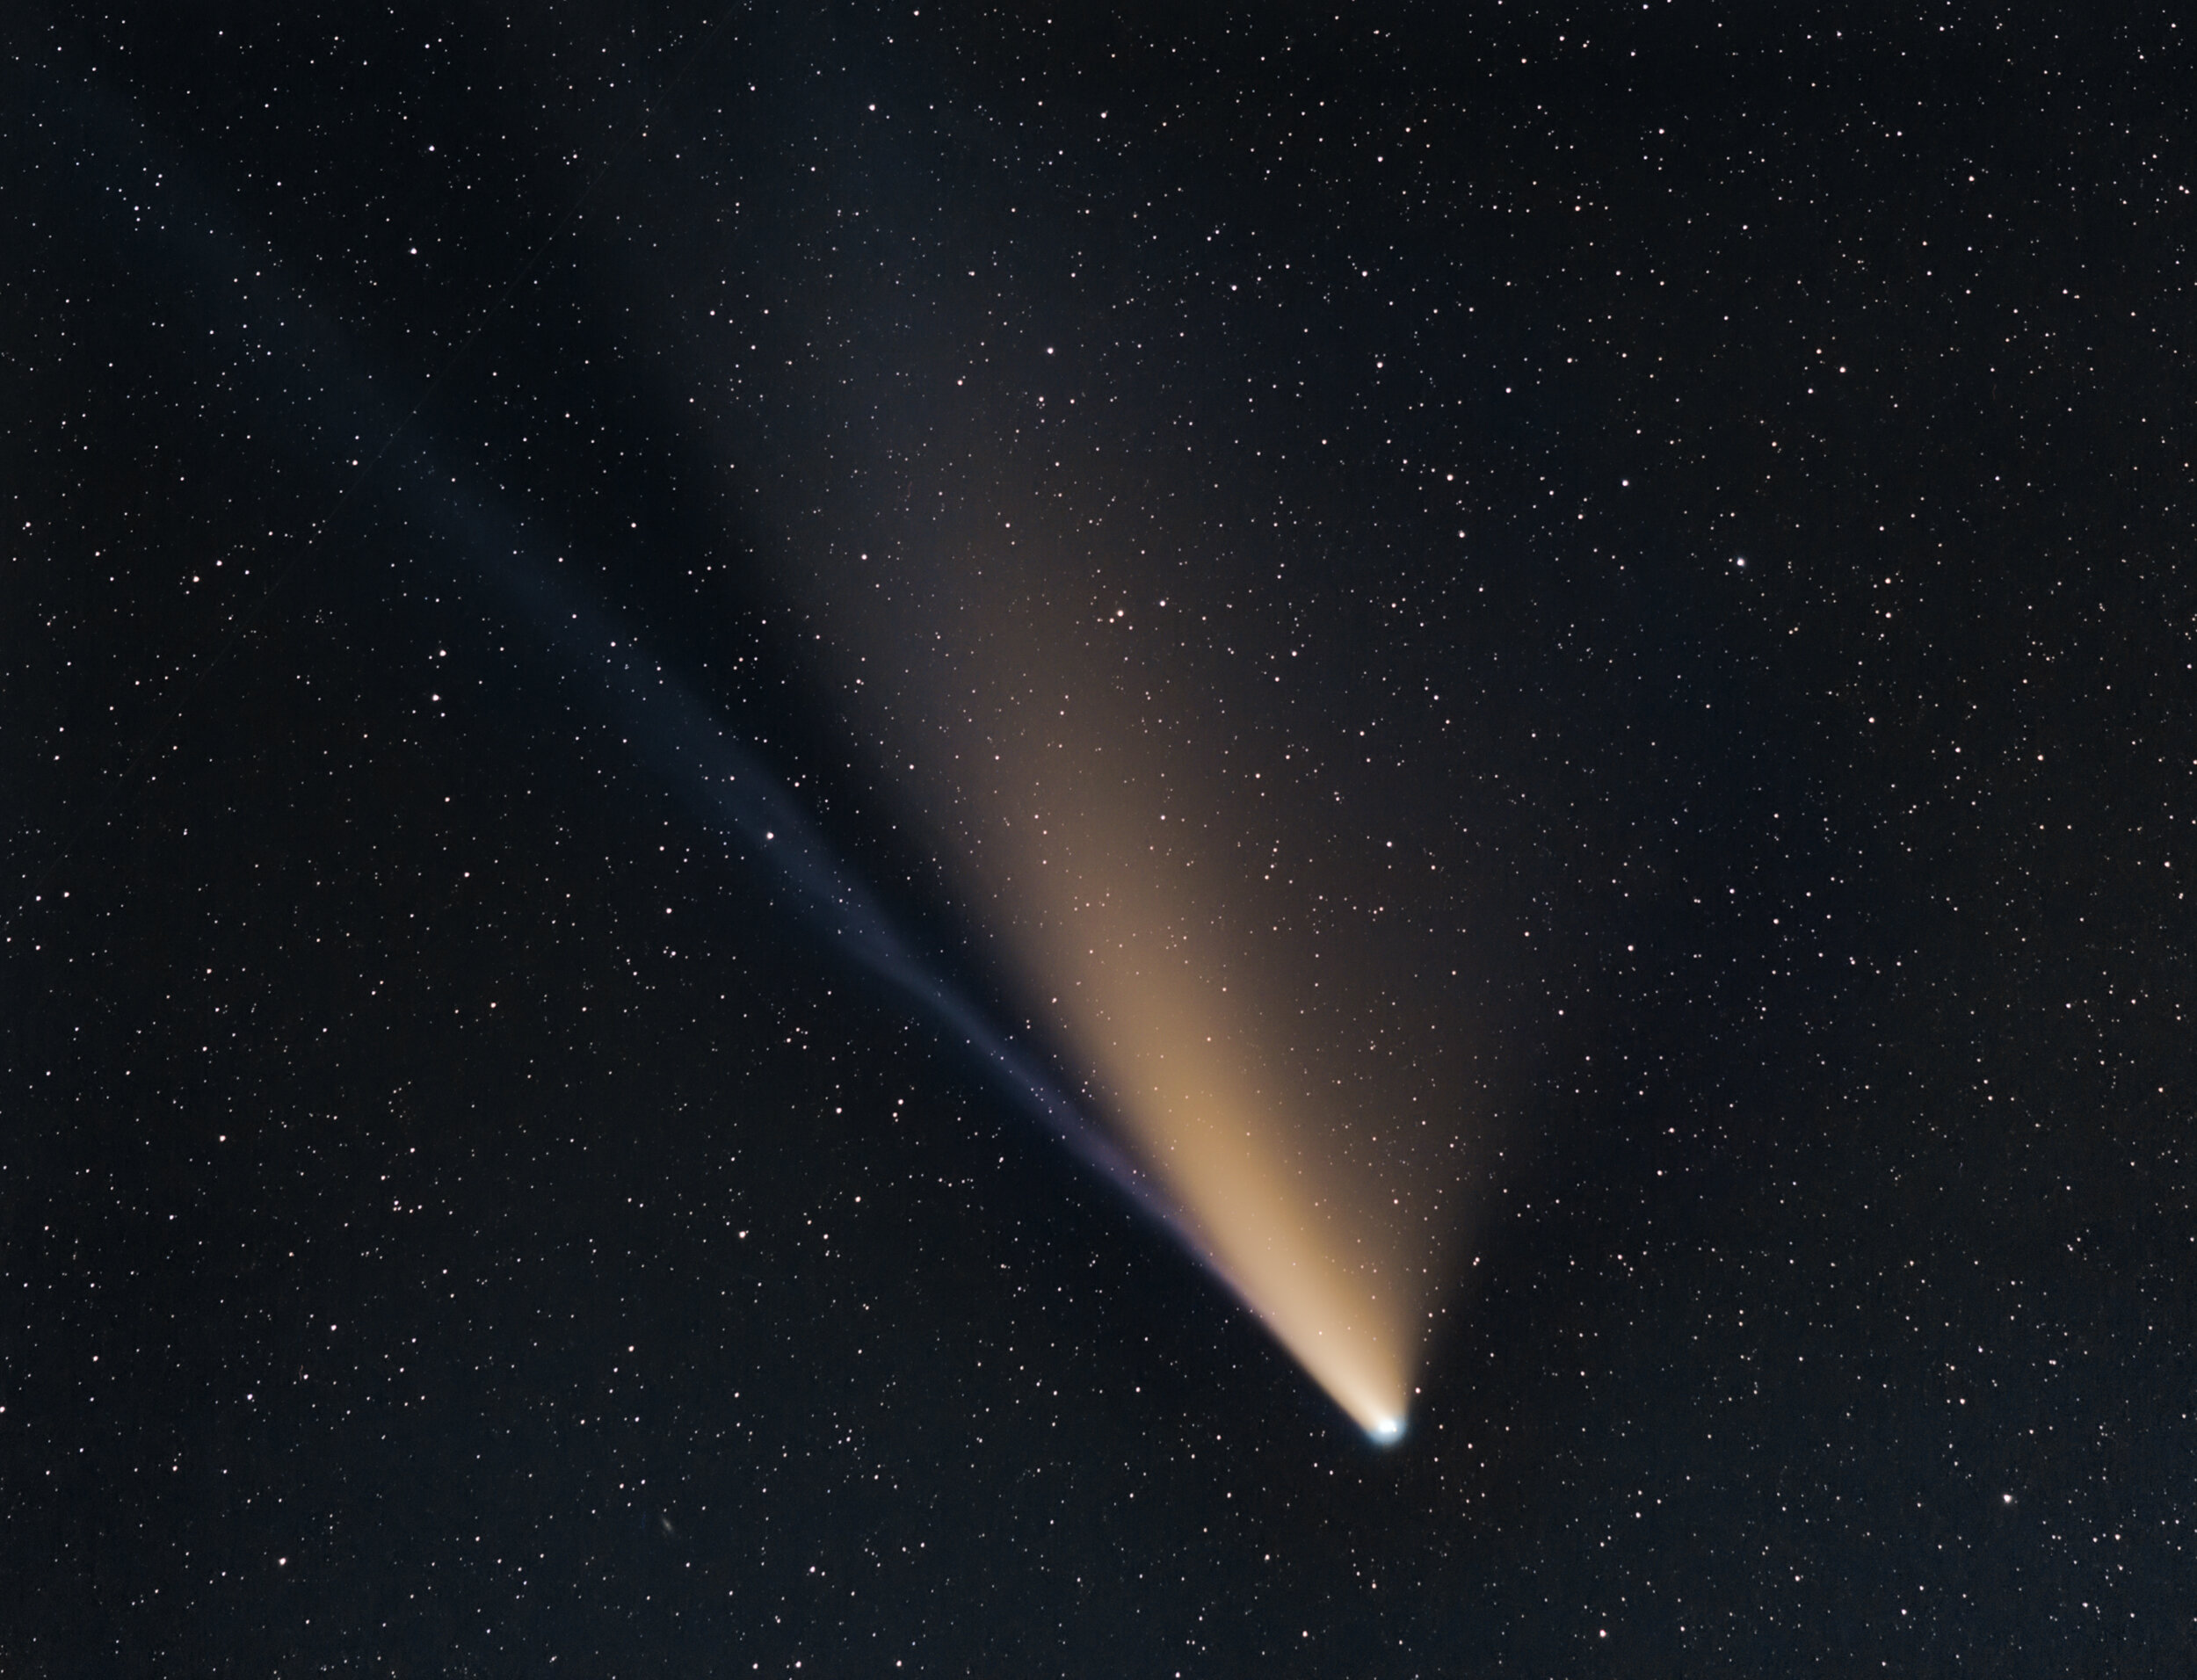 *** Comet Neowise ***